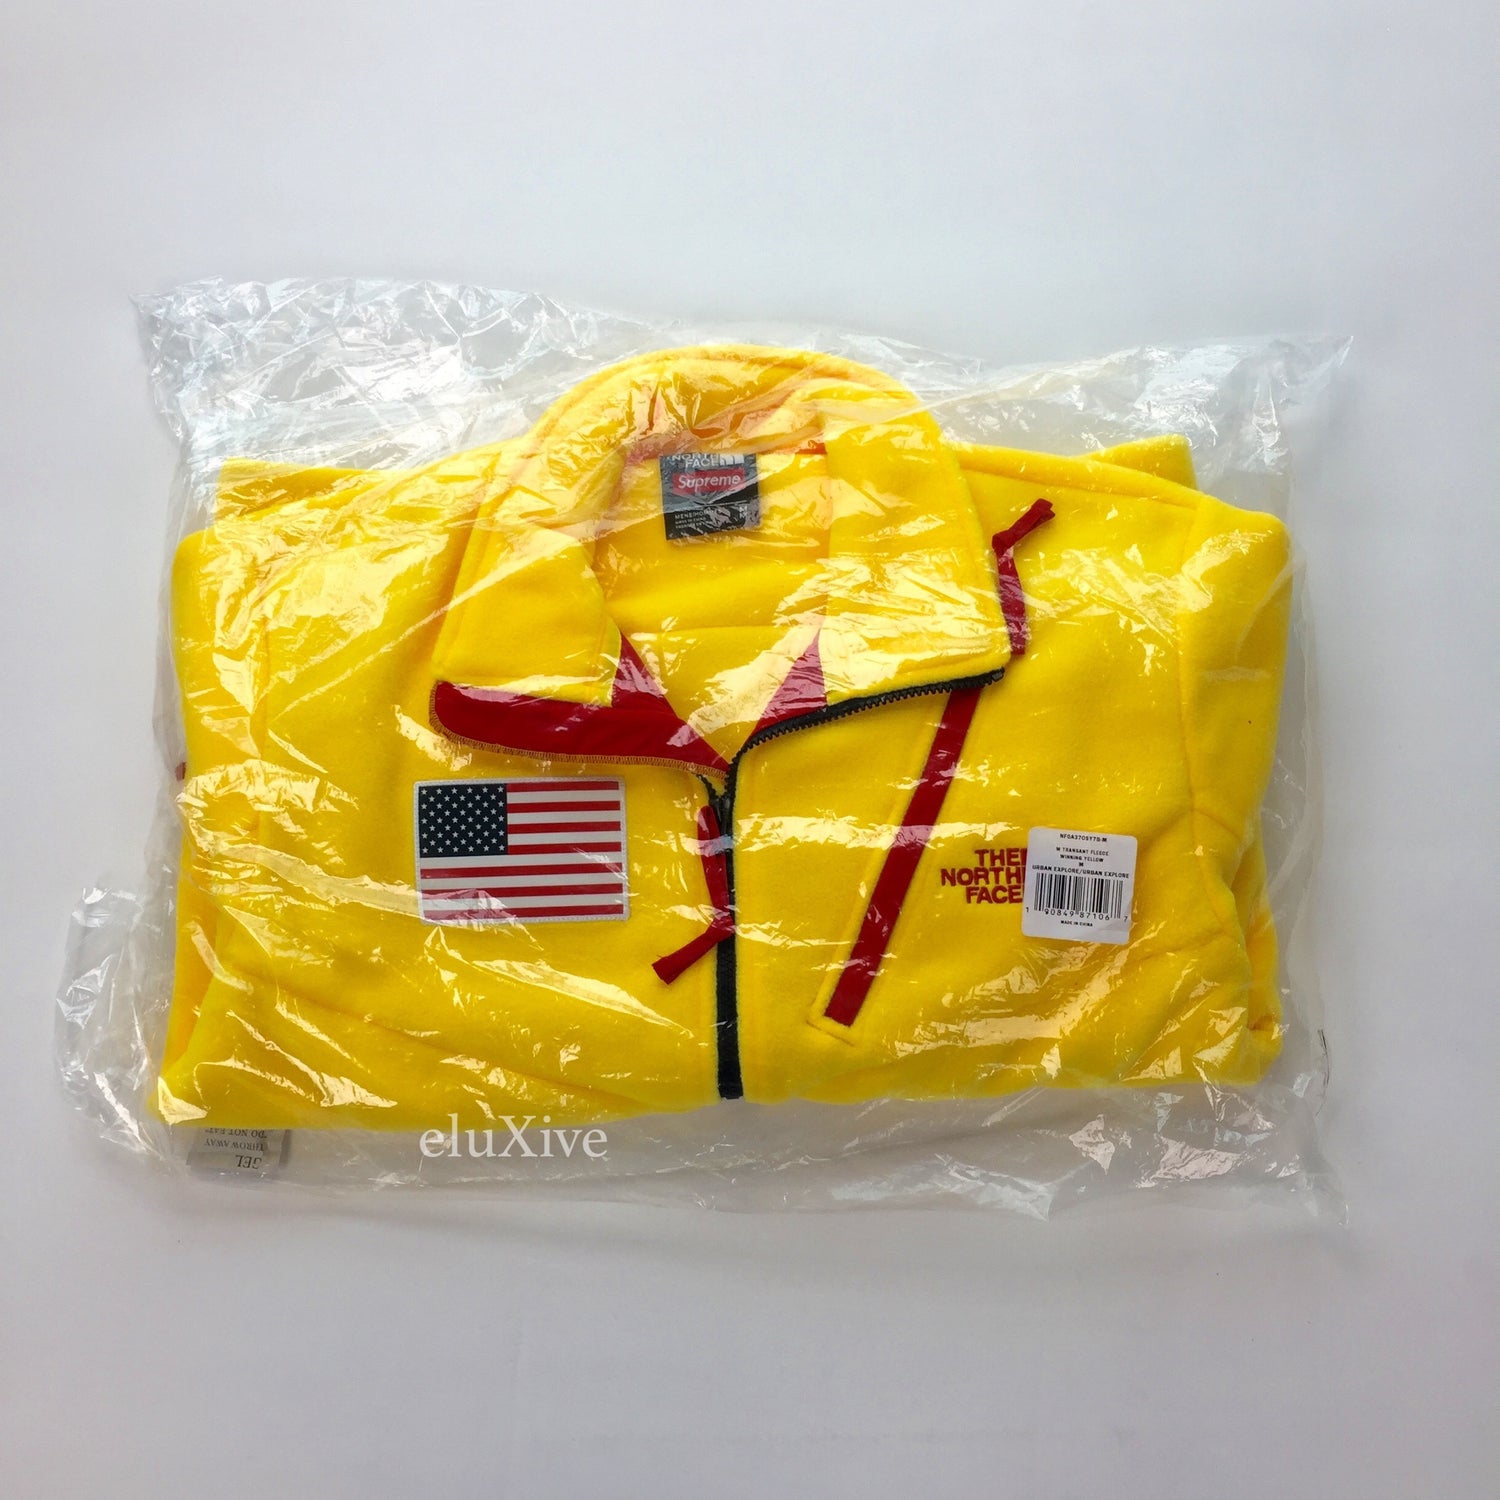 Supreme x The North Face - Yellow Trans Antarctica Expedition